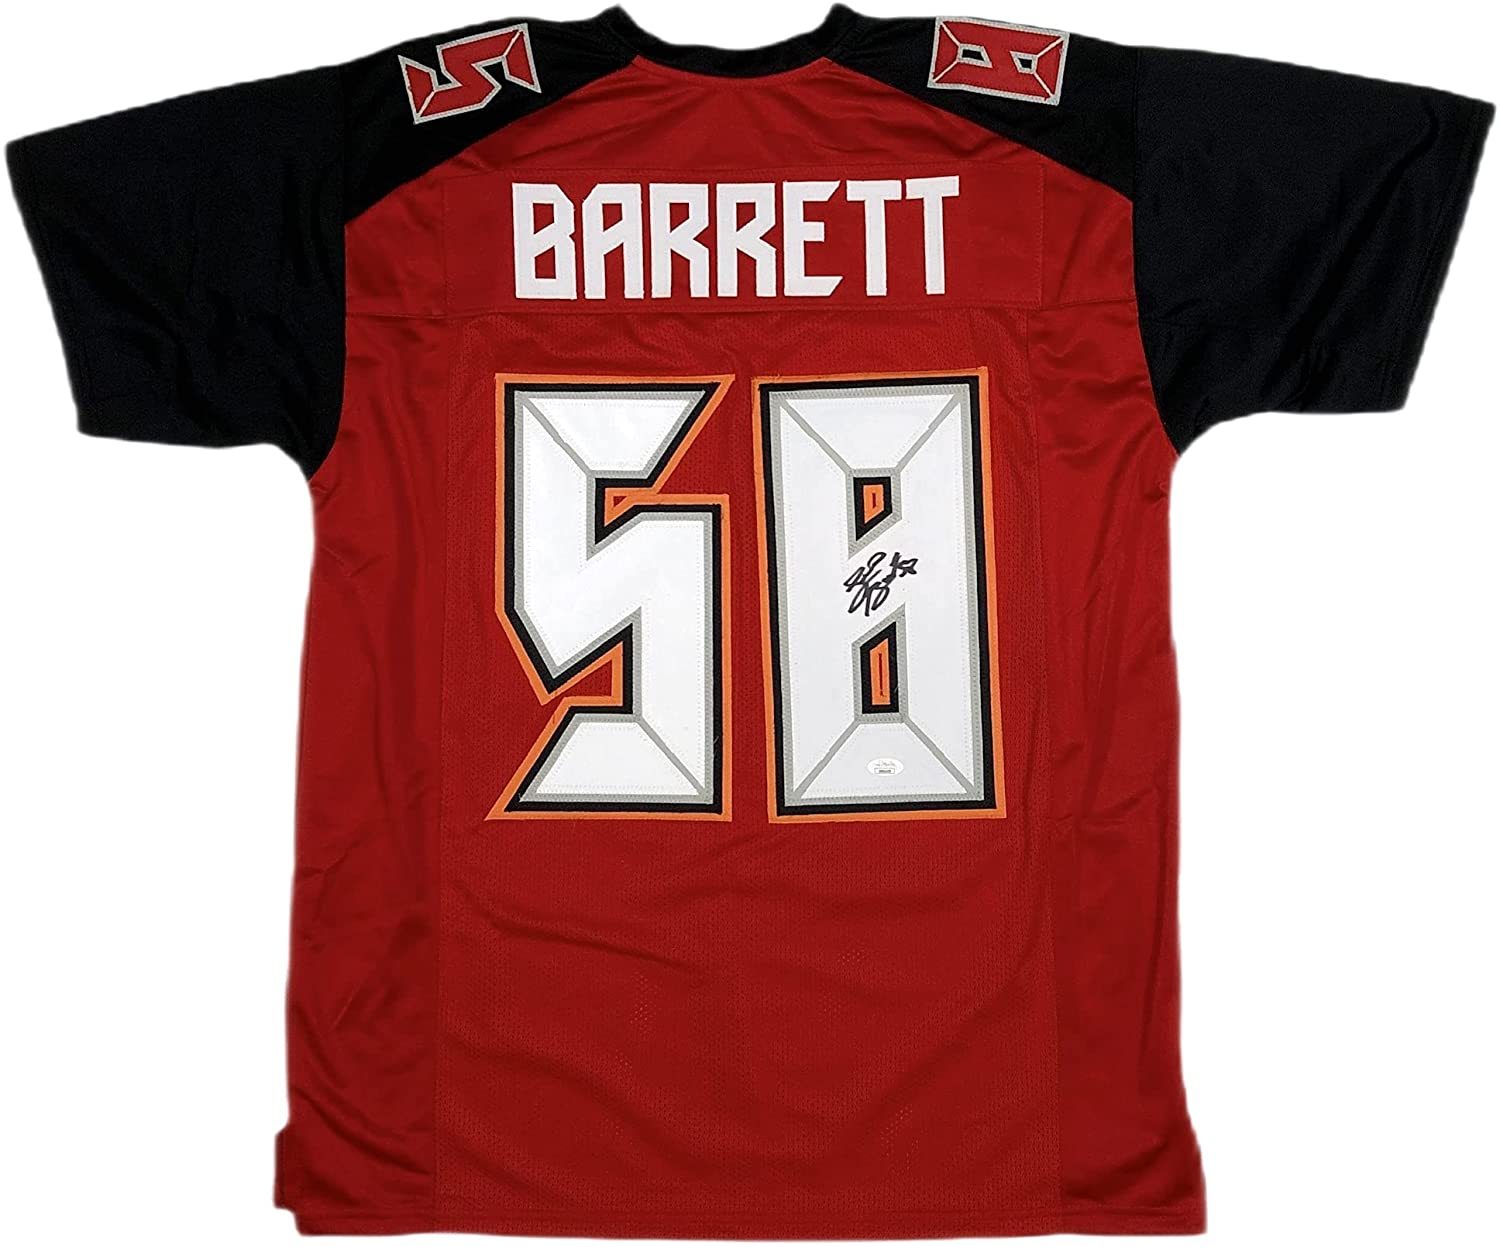 Primary image for SHAQUILLE SHAQ BARRETT Autographed Hand SIGNED Custom JERSEY JSA AUTHENTIC BUCS